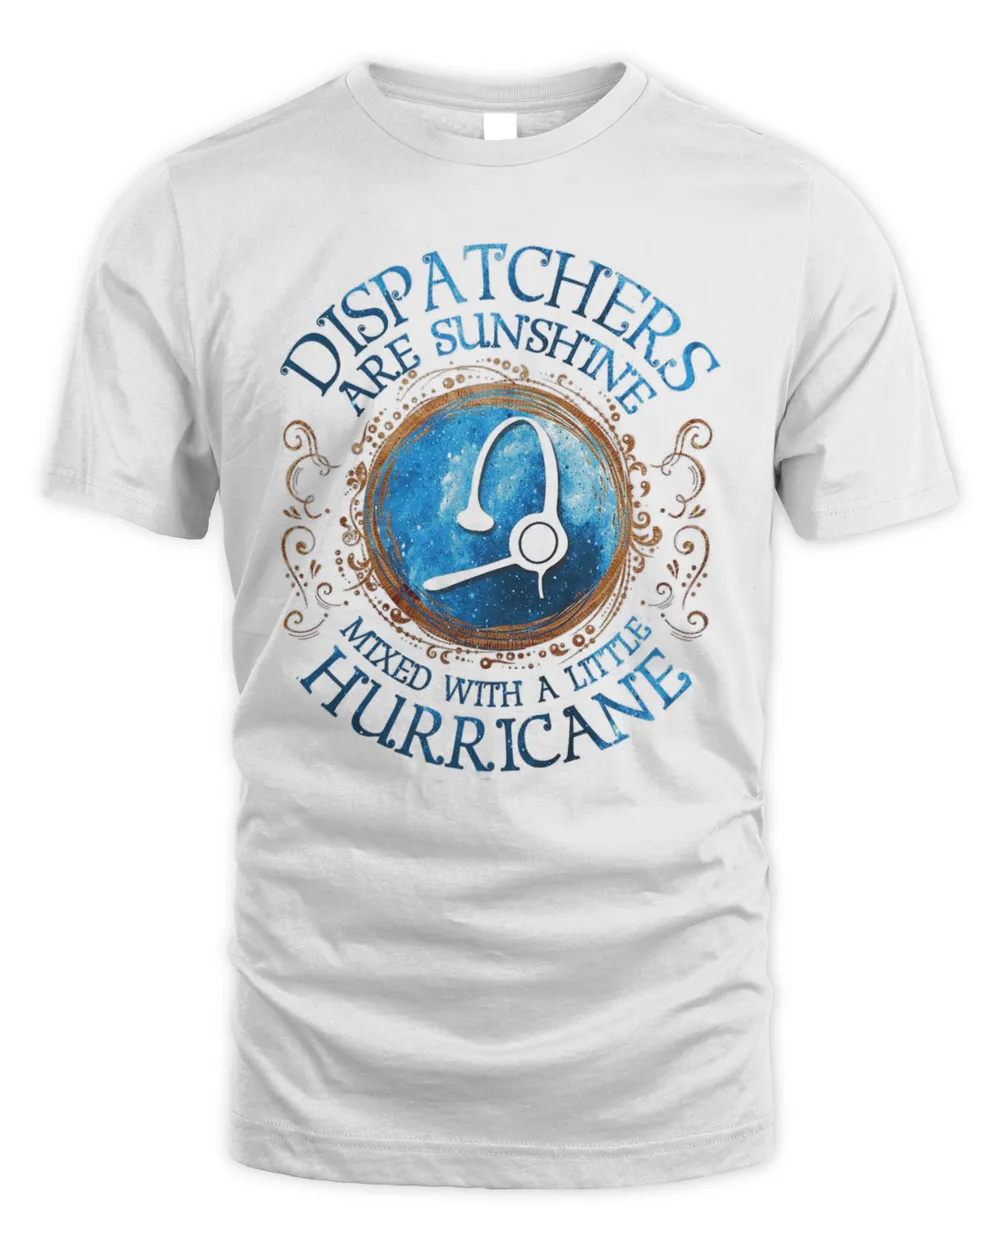 Dispatchers Are Sunshine Mixed With A Little Hurricane Shirt